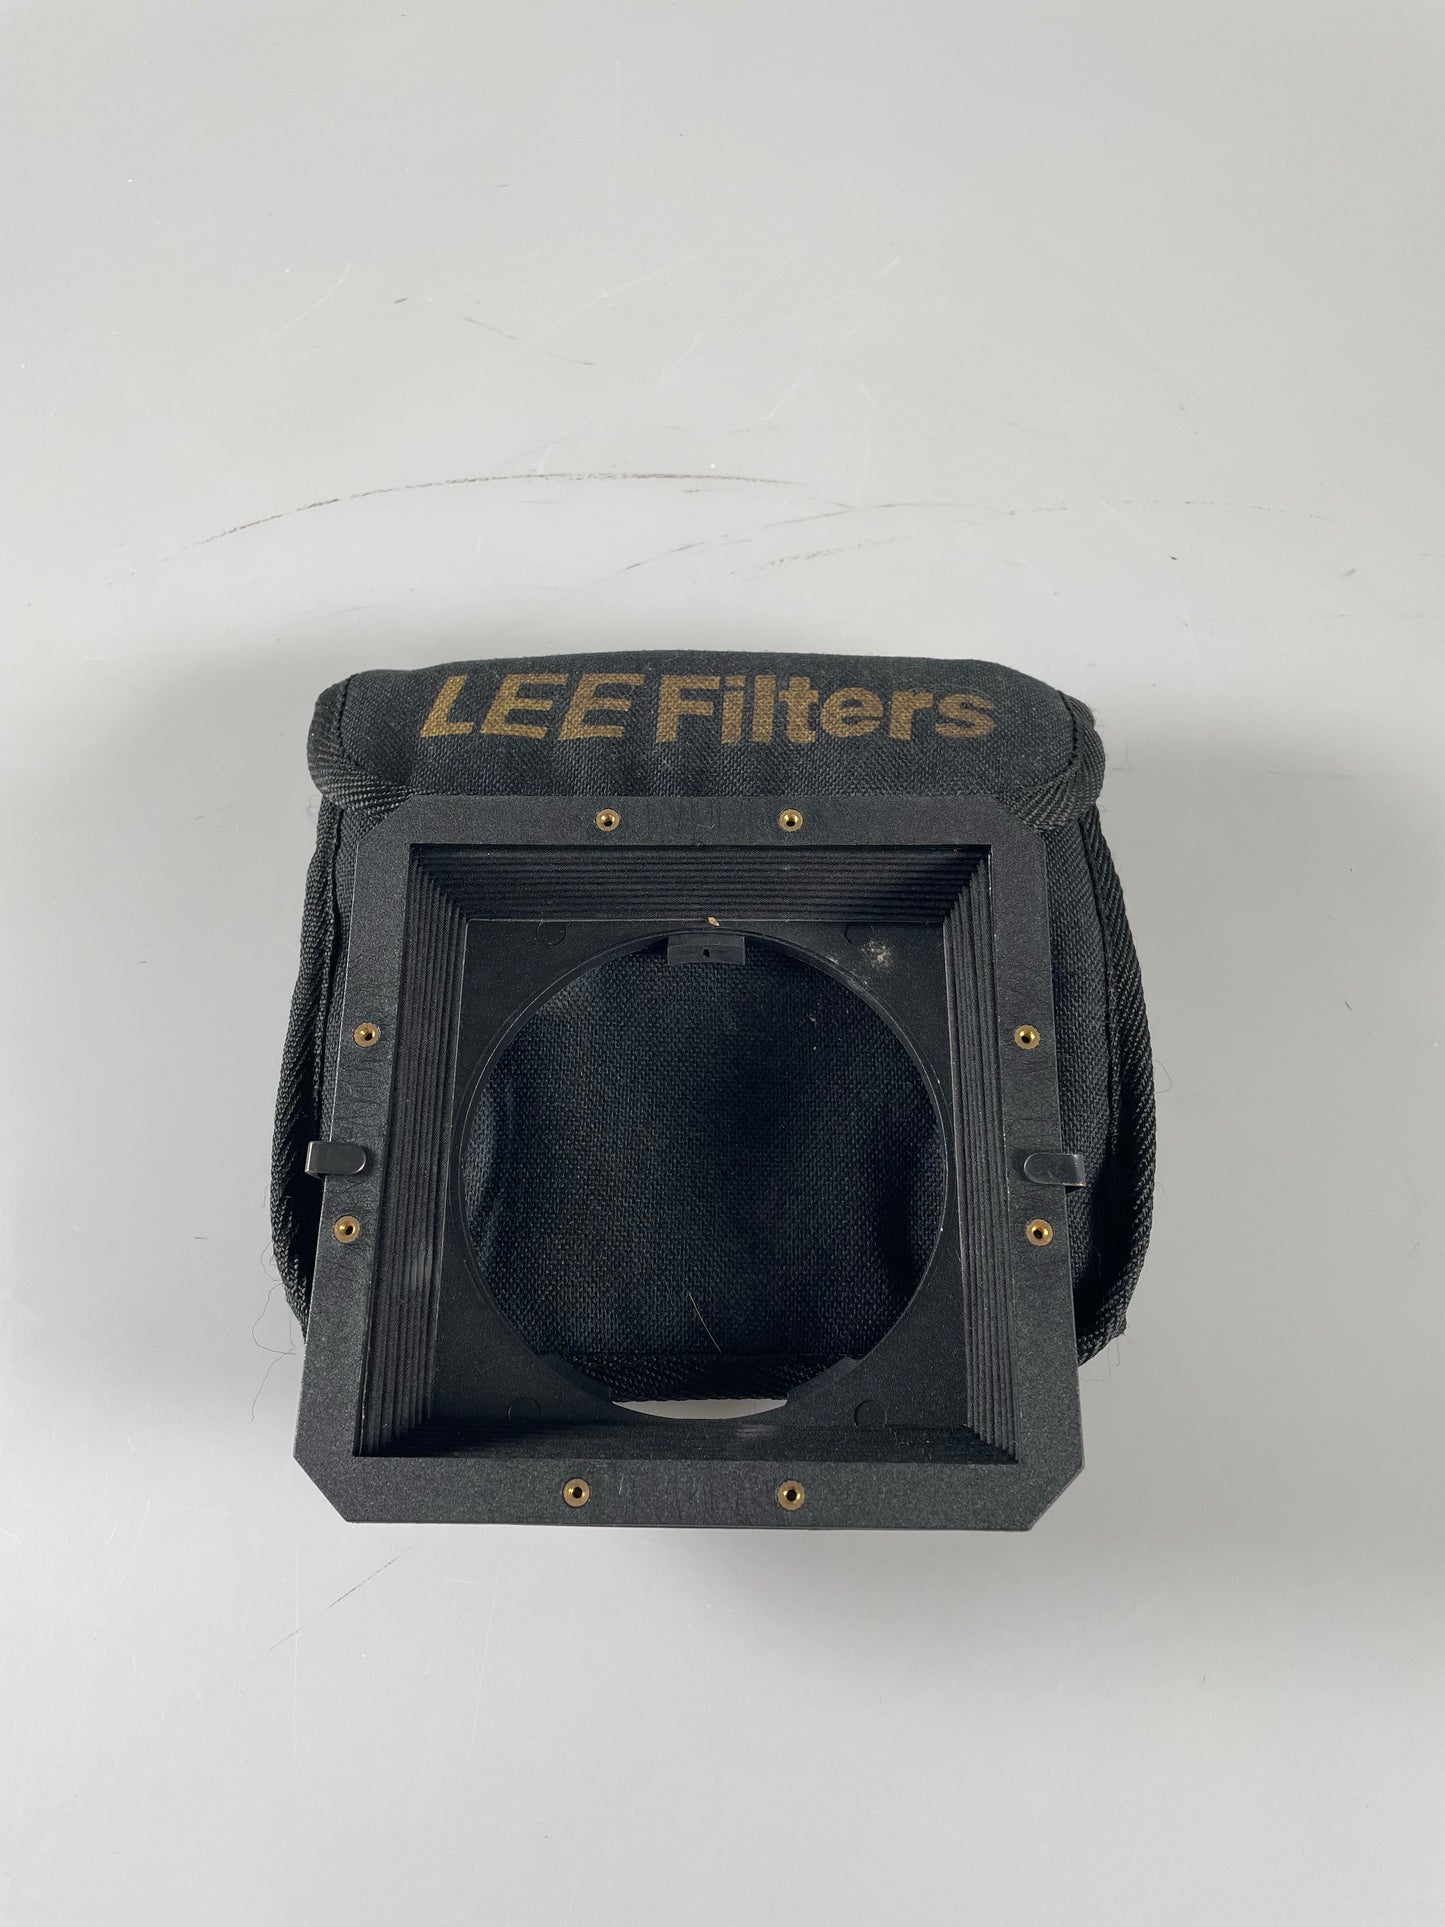 Lee 100mm Filter System Bellows Hood with Pouch